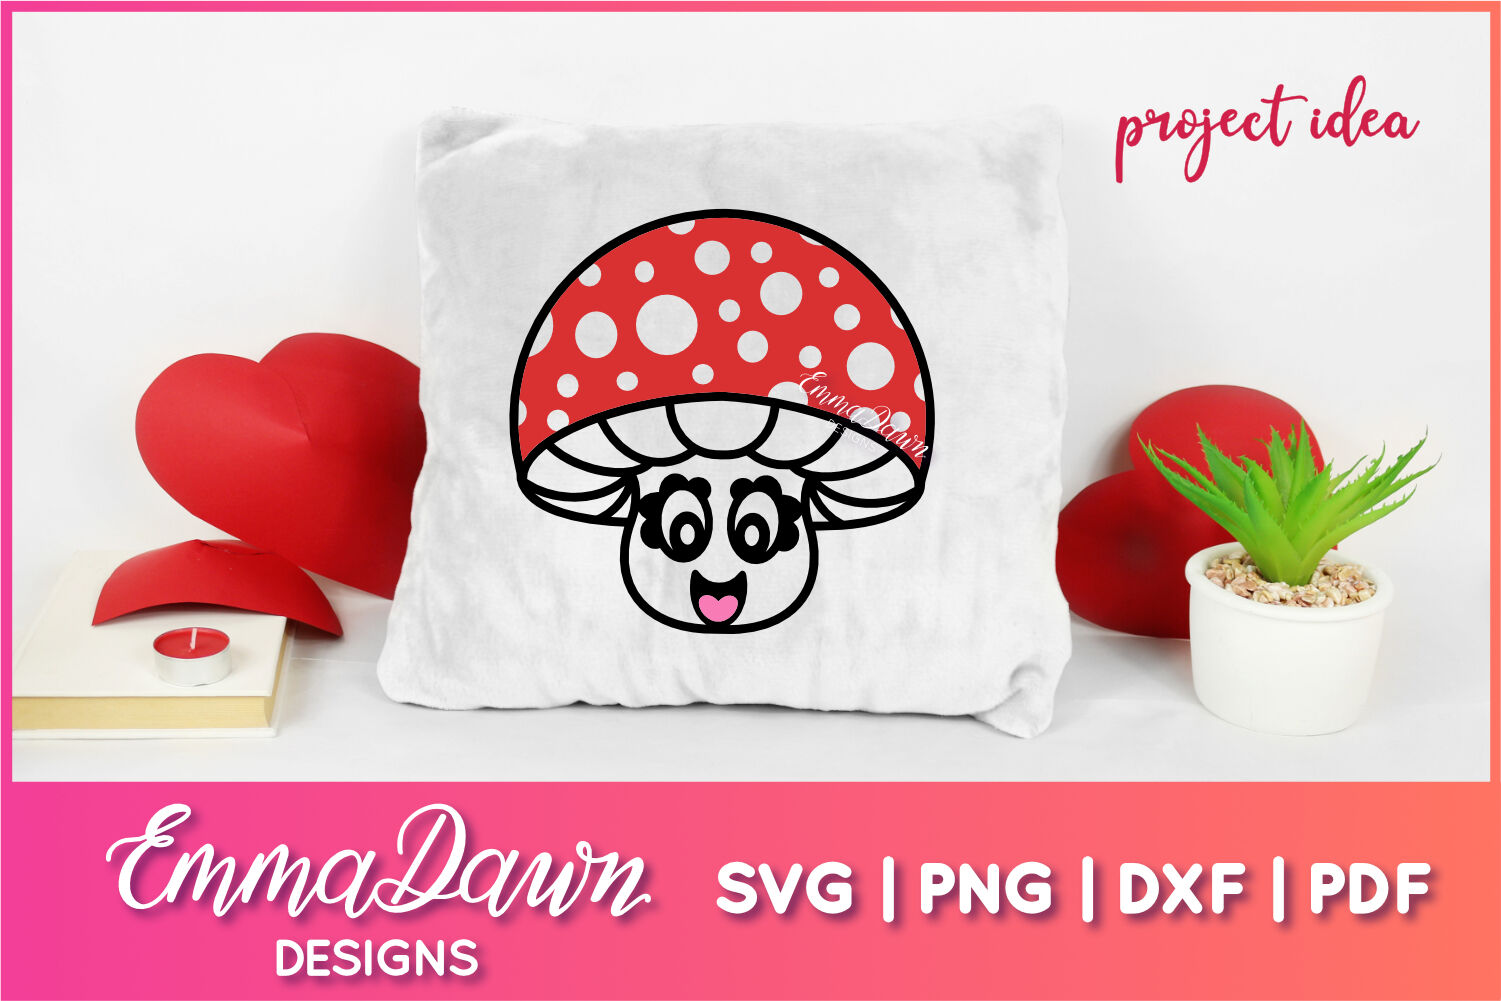 Decorate pillow with red mushroom.